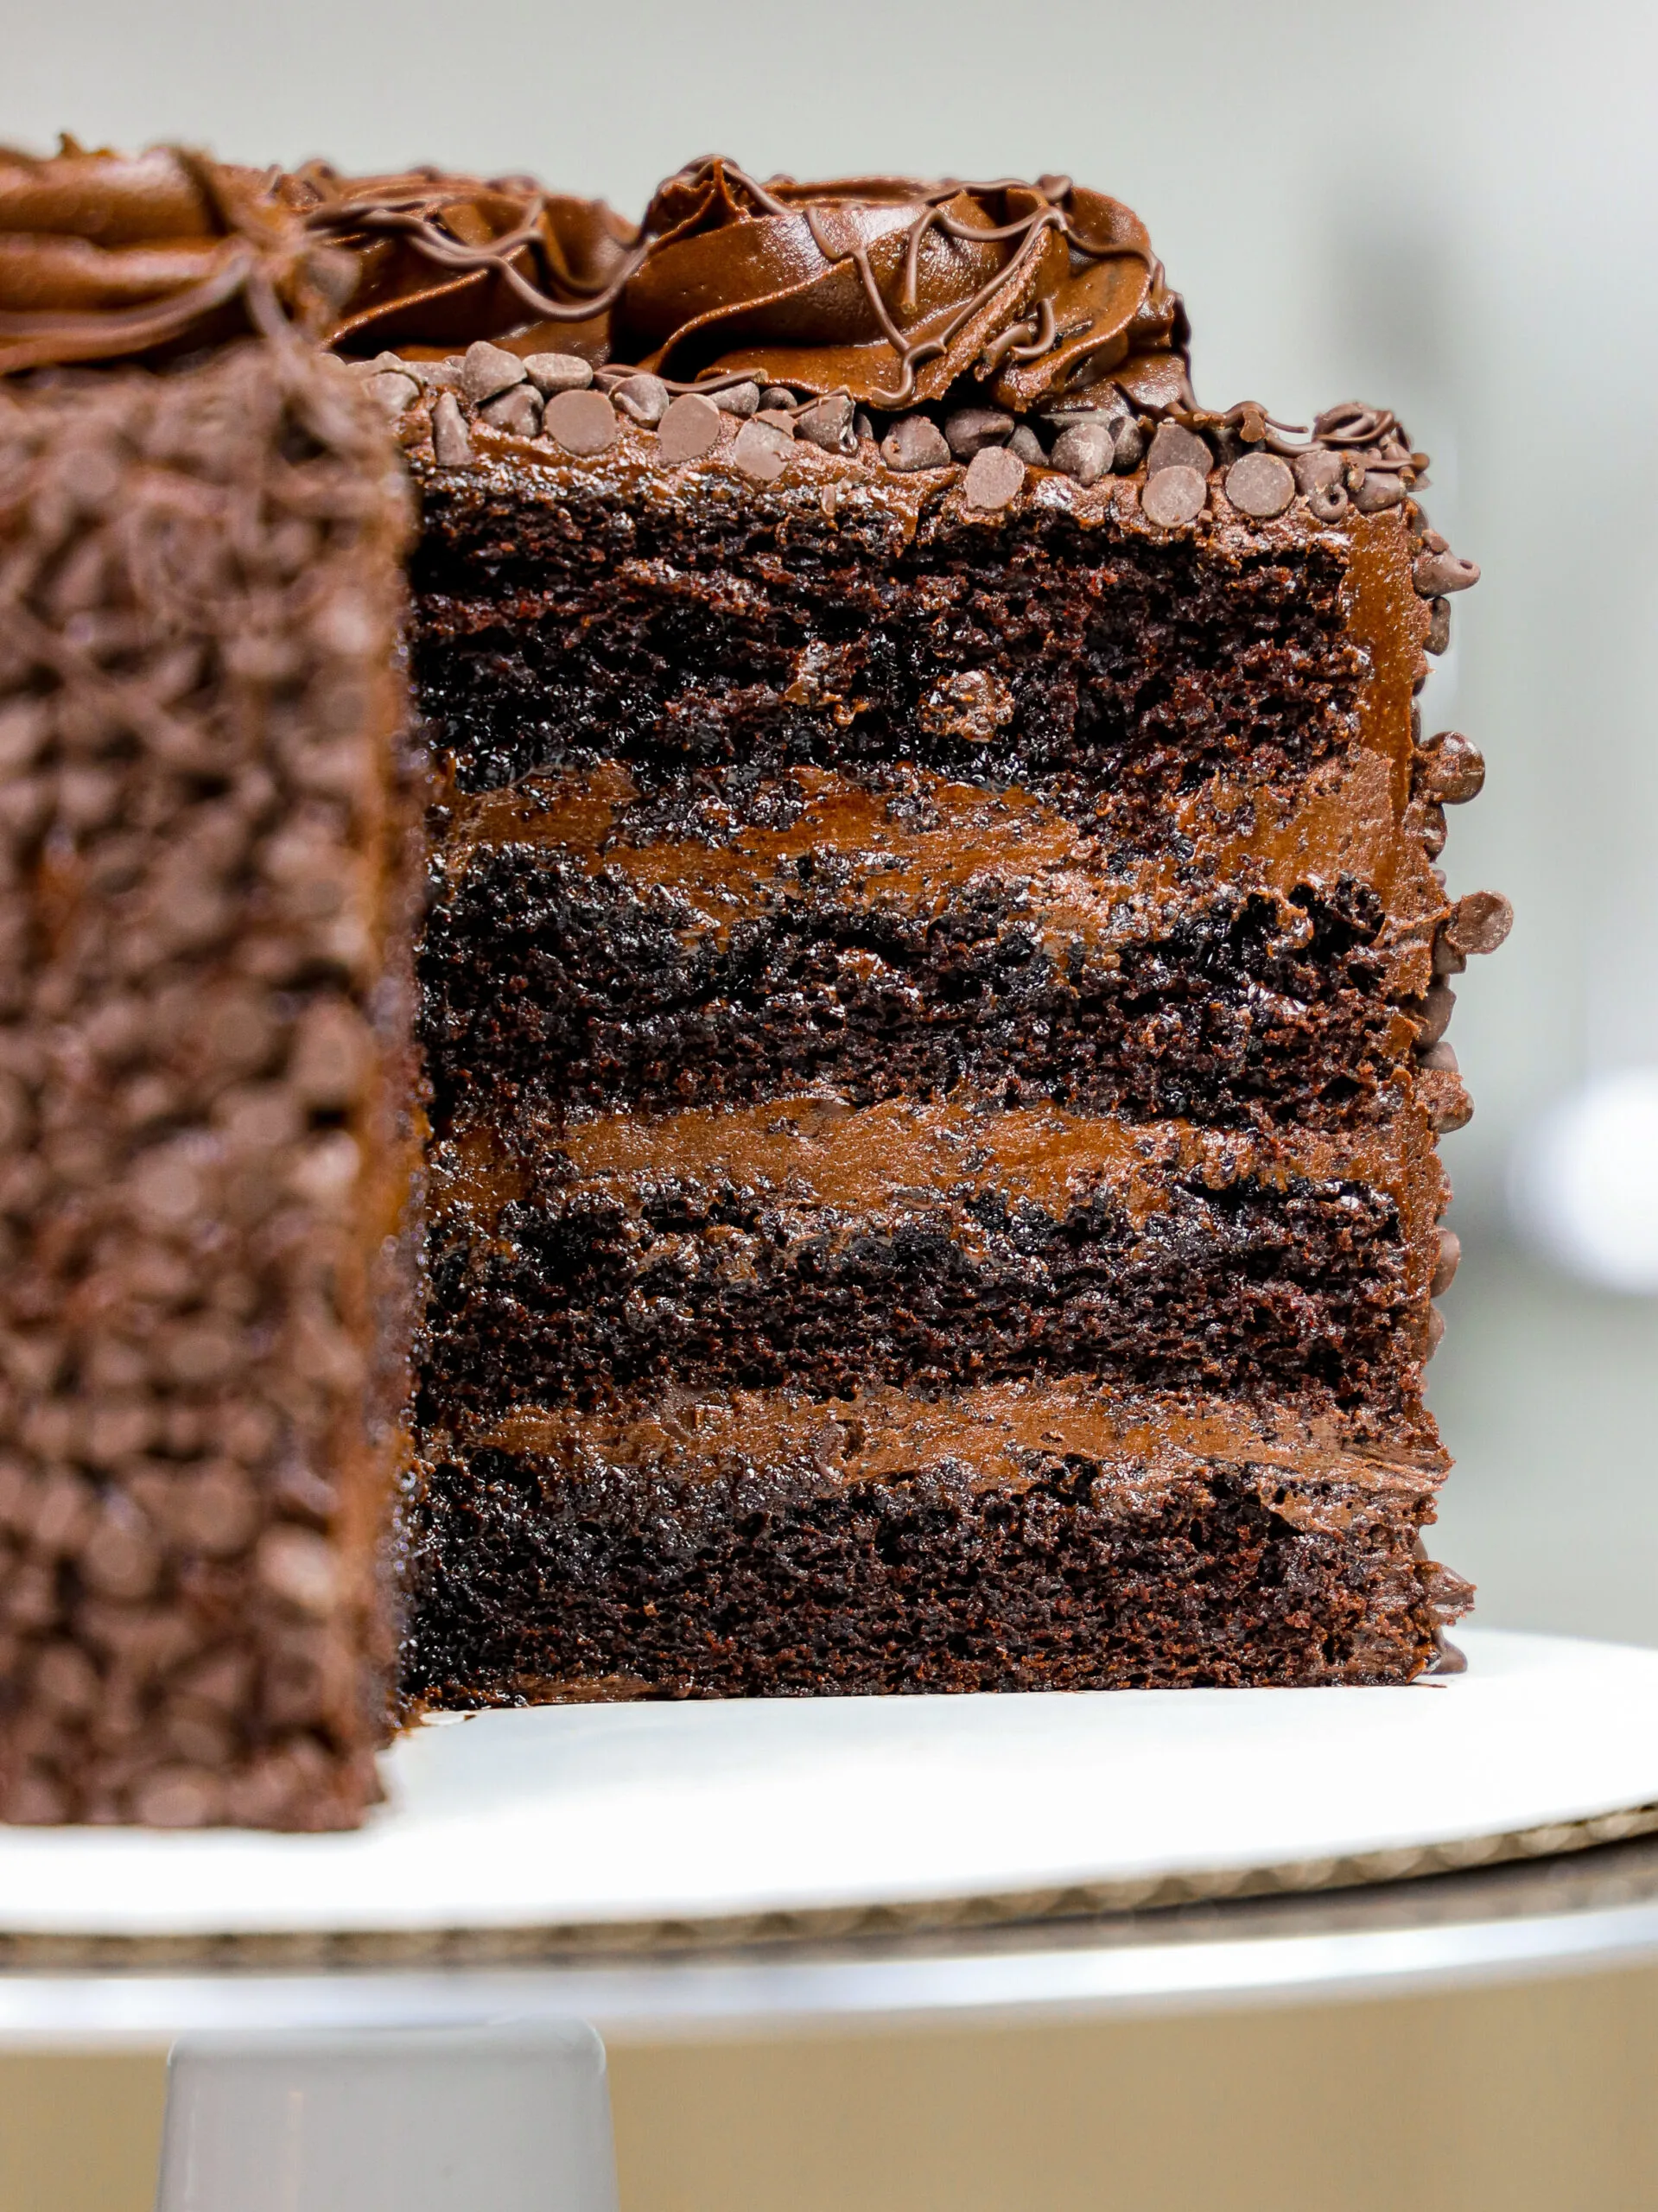 Ruth Reichl's Giant Chocolate Cake Recipe - NYT Cooking